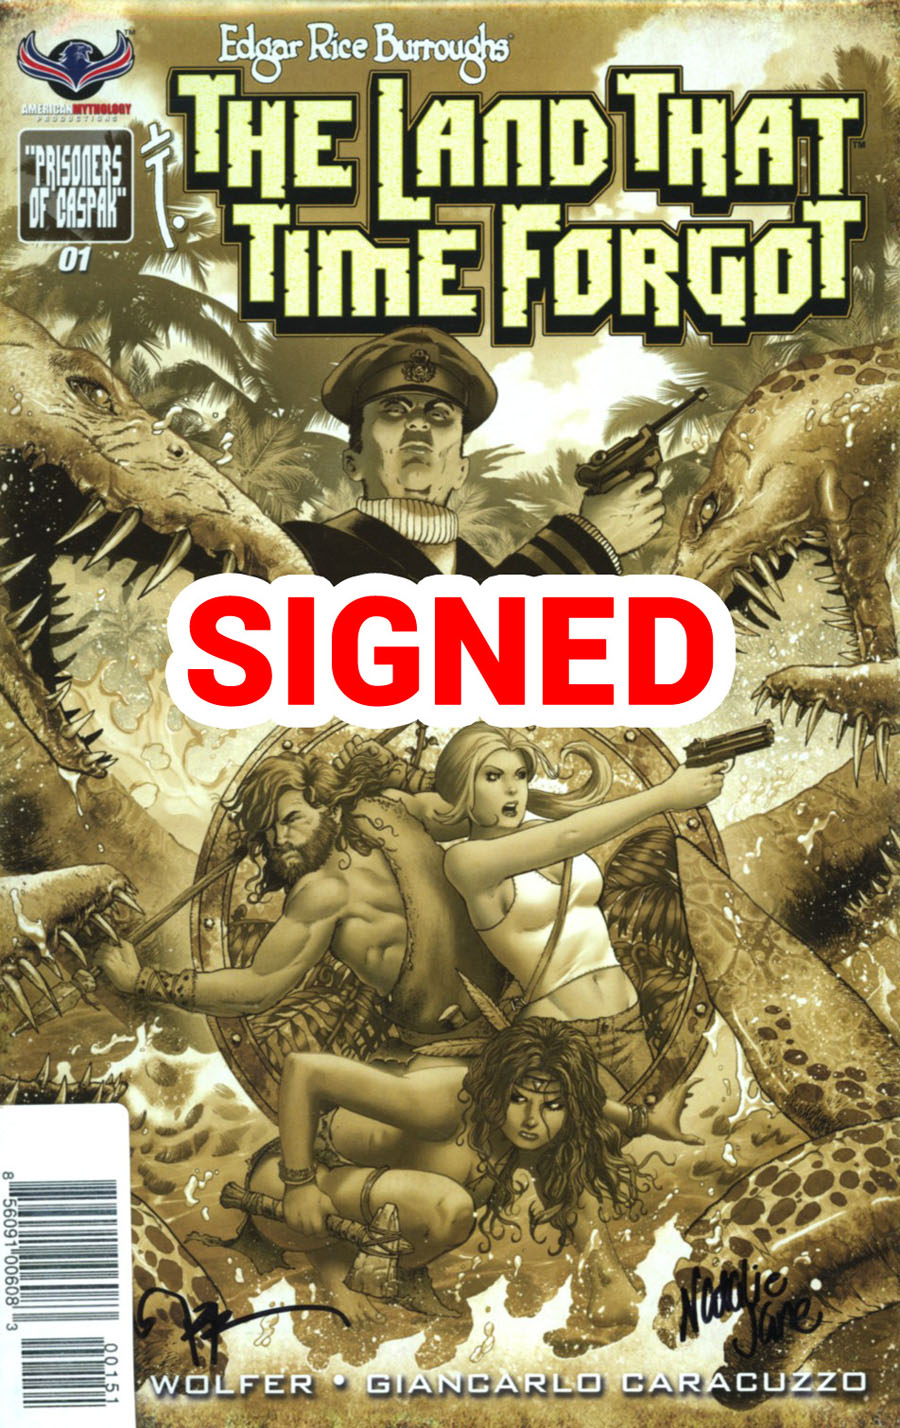 Edgar Rice Burroughs Land That Time Forgot #1 Cover E Variant Antique Cover Signed By Mike Wolfer